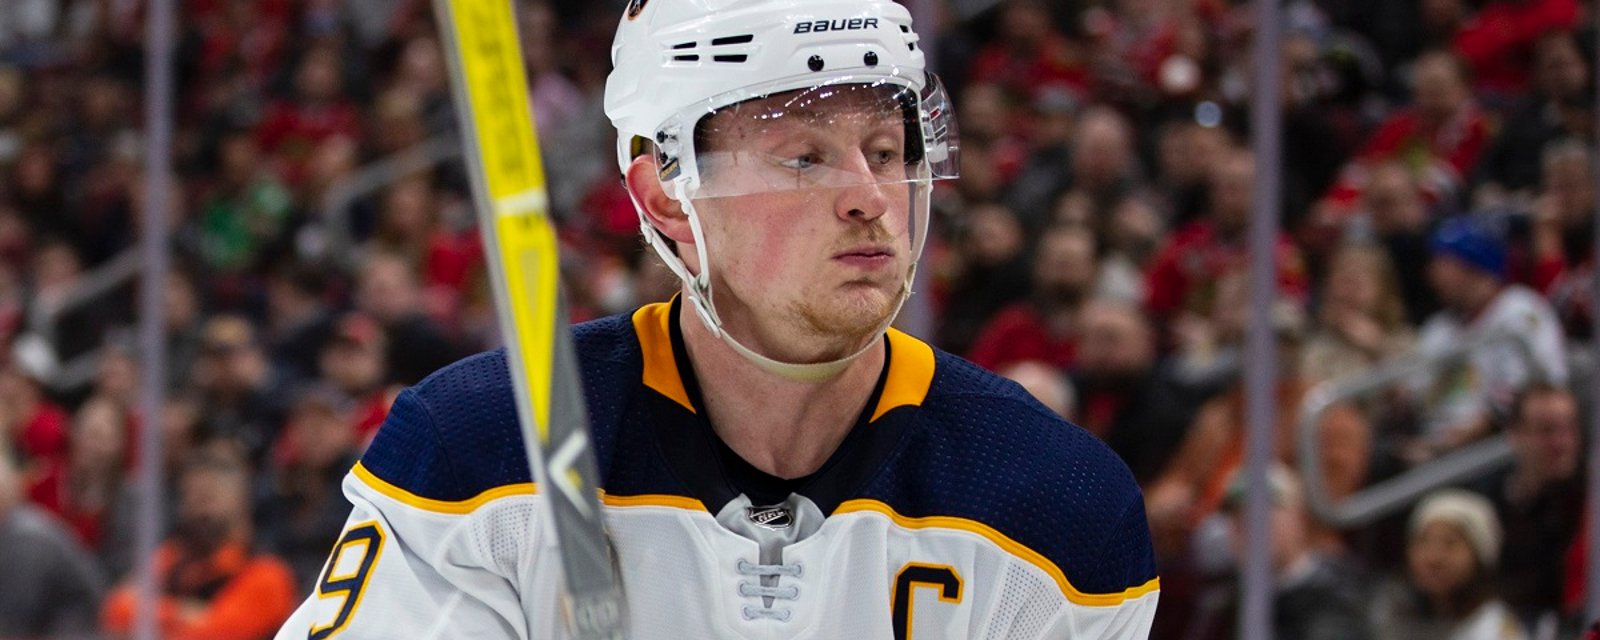 Jack Eichel directly contradicts his head coach.